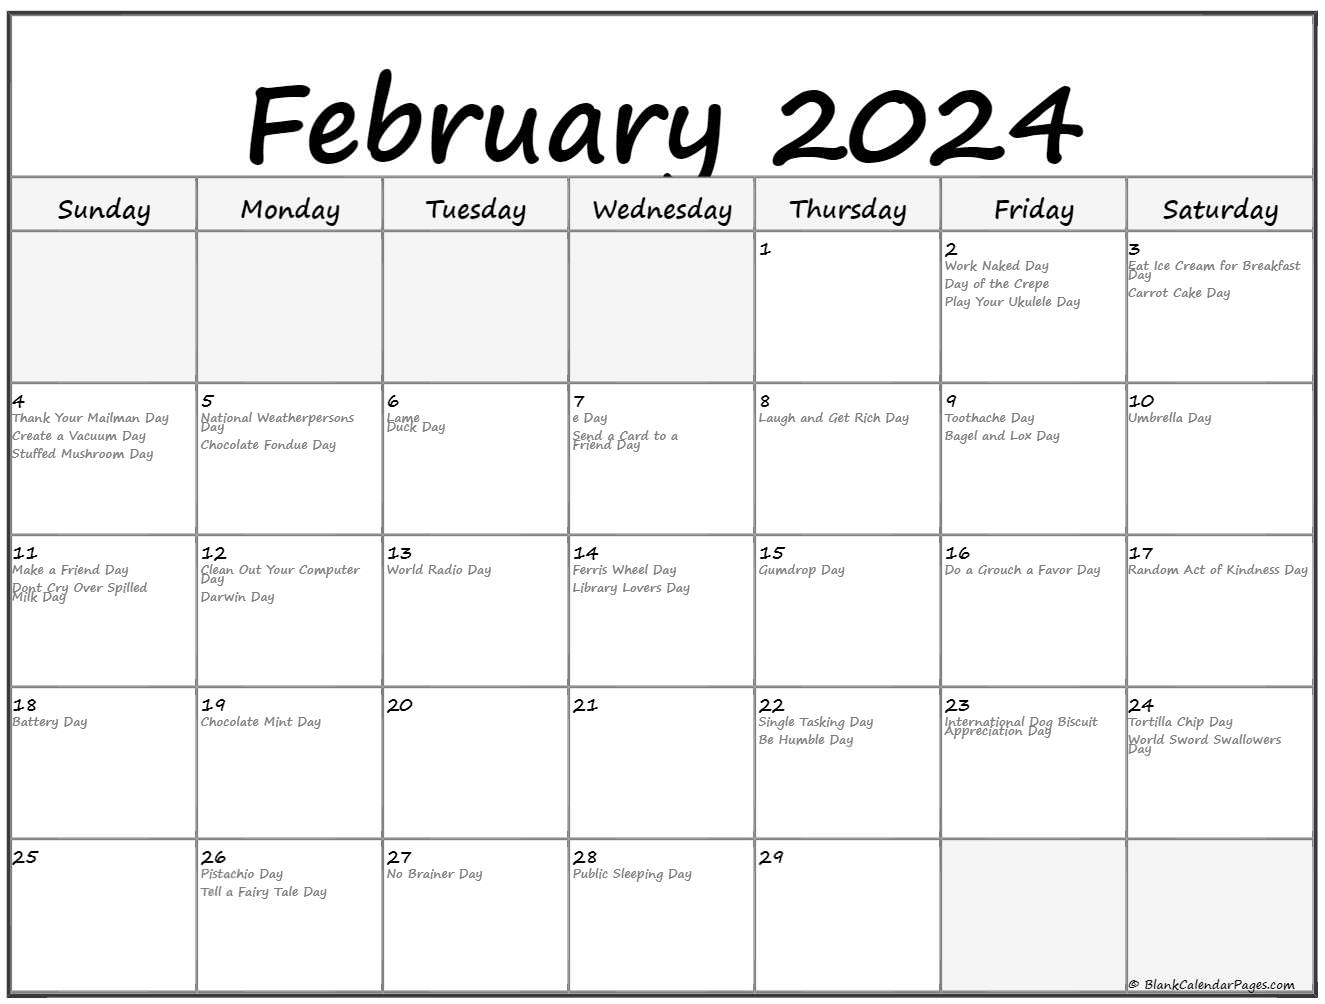 February Days Events 2024 New Top Awesome Review of Lunar Events